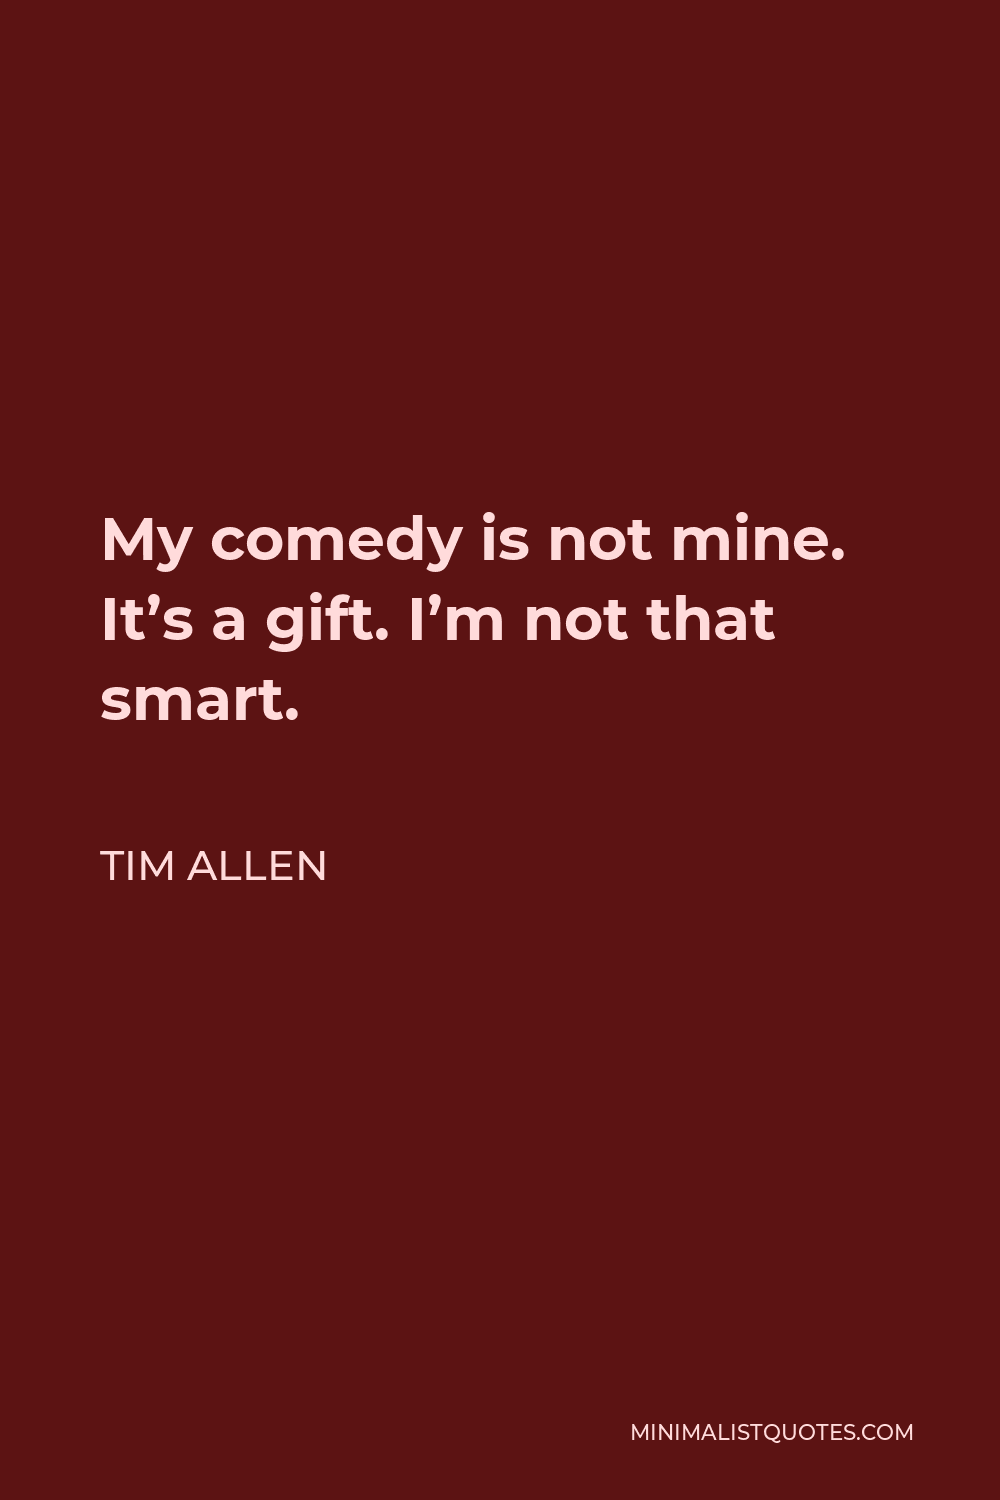 Tim Allen Quote - My comedy is not mine. It’s a gift. I’m not that smart.